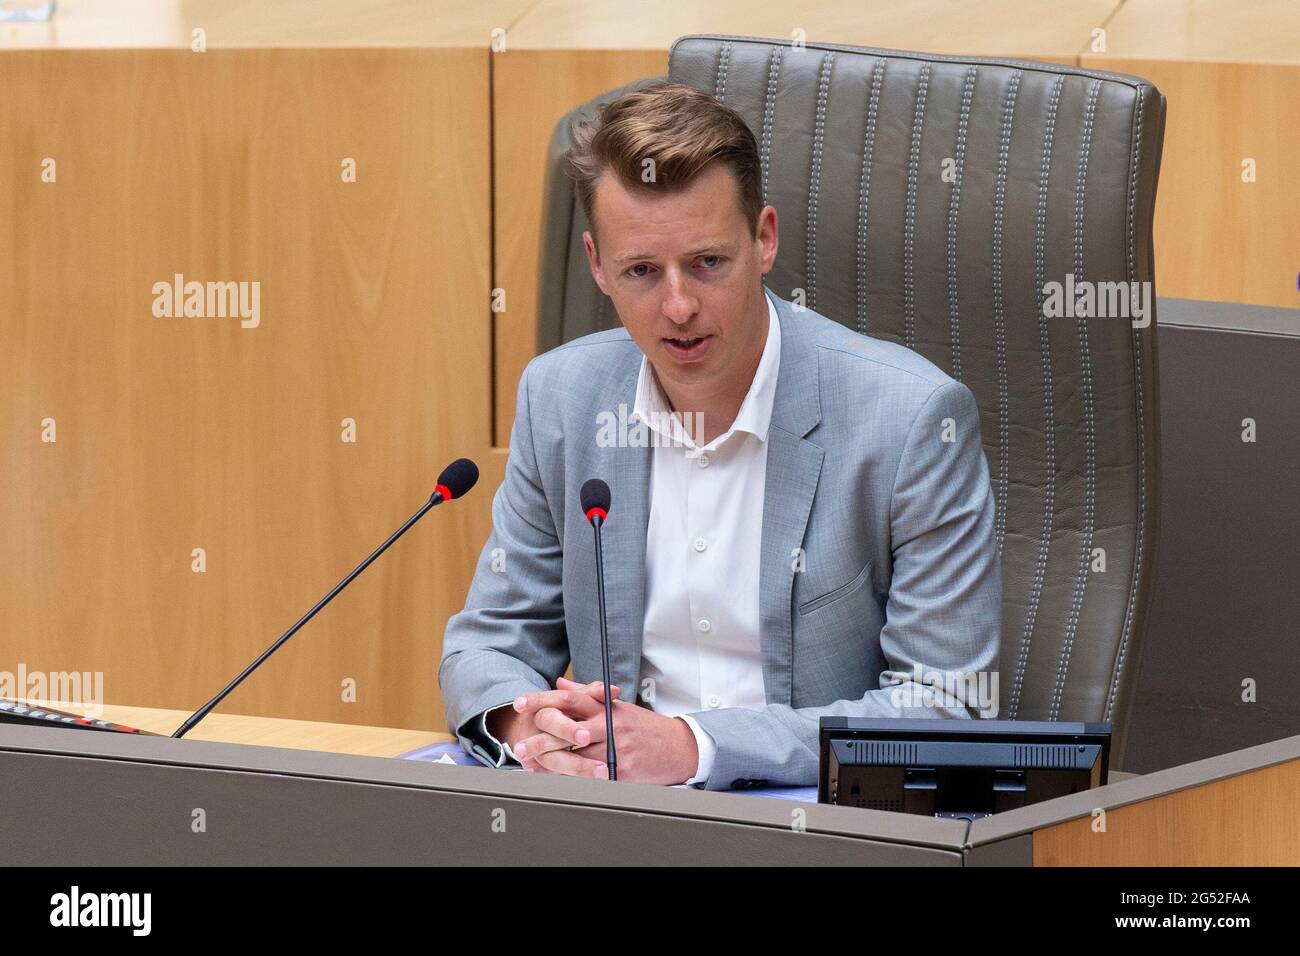 Vooruit's Hannes Anaf pictured during the installation of a reserach commission on the PFAS - PFOS pollutions, in the Flemish Parliament in Brussels, Stock Photo